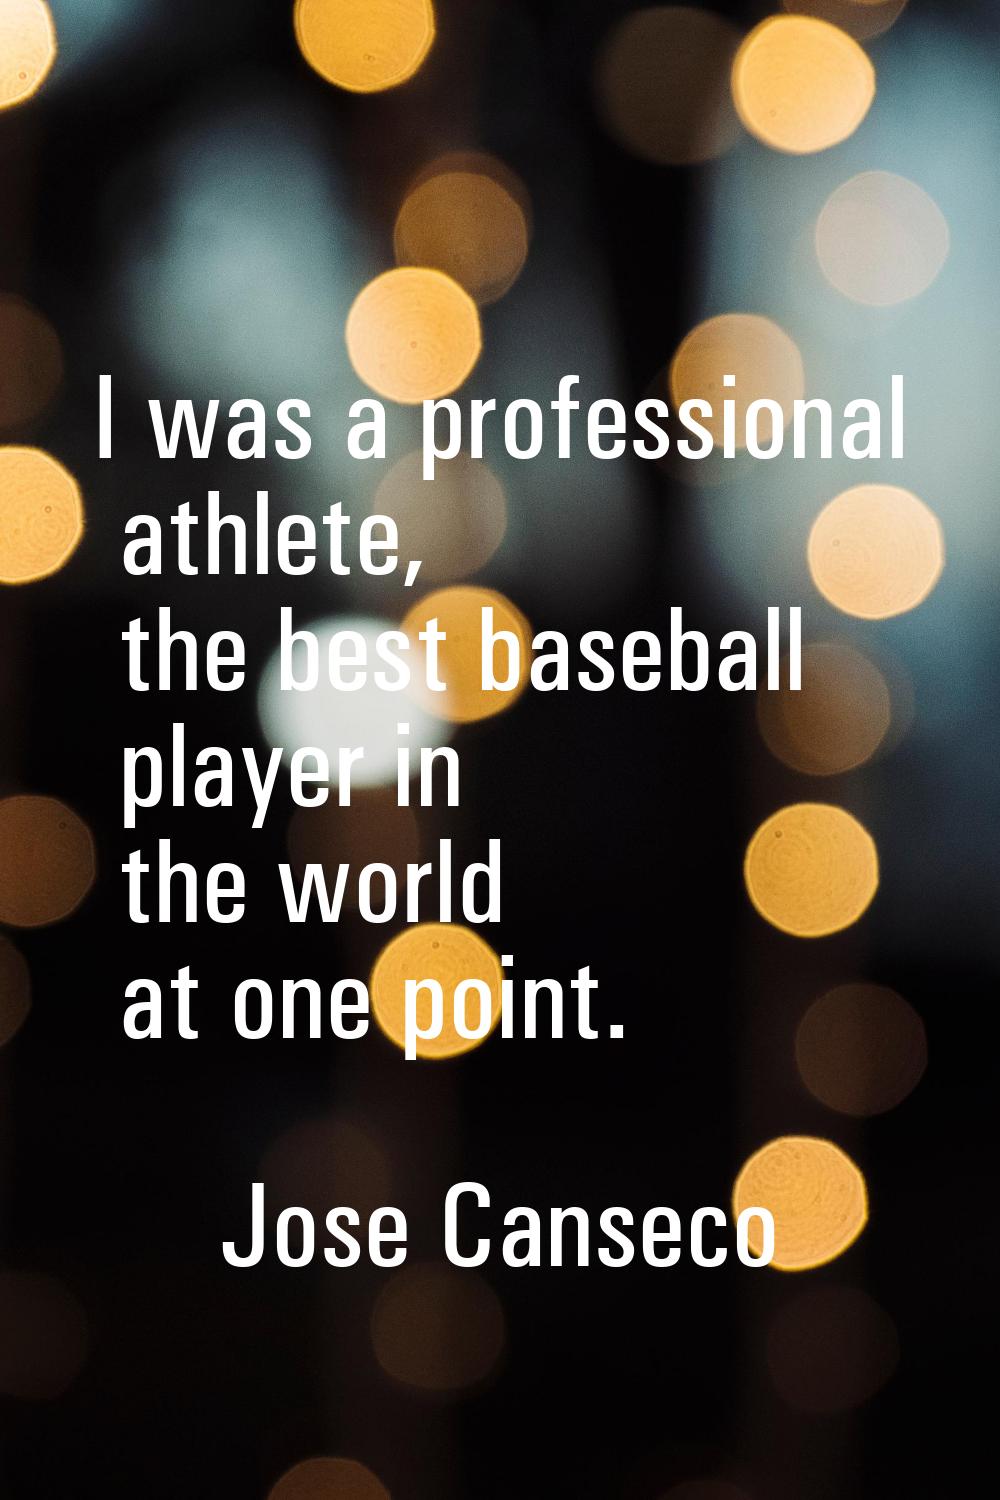 I was a professional athlete, the best baseball player in the world at one point.